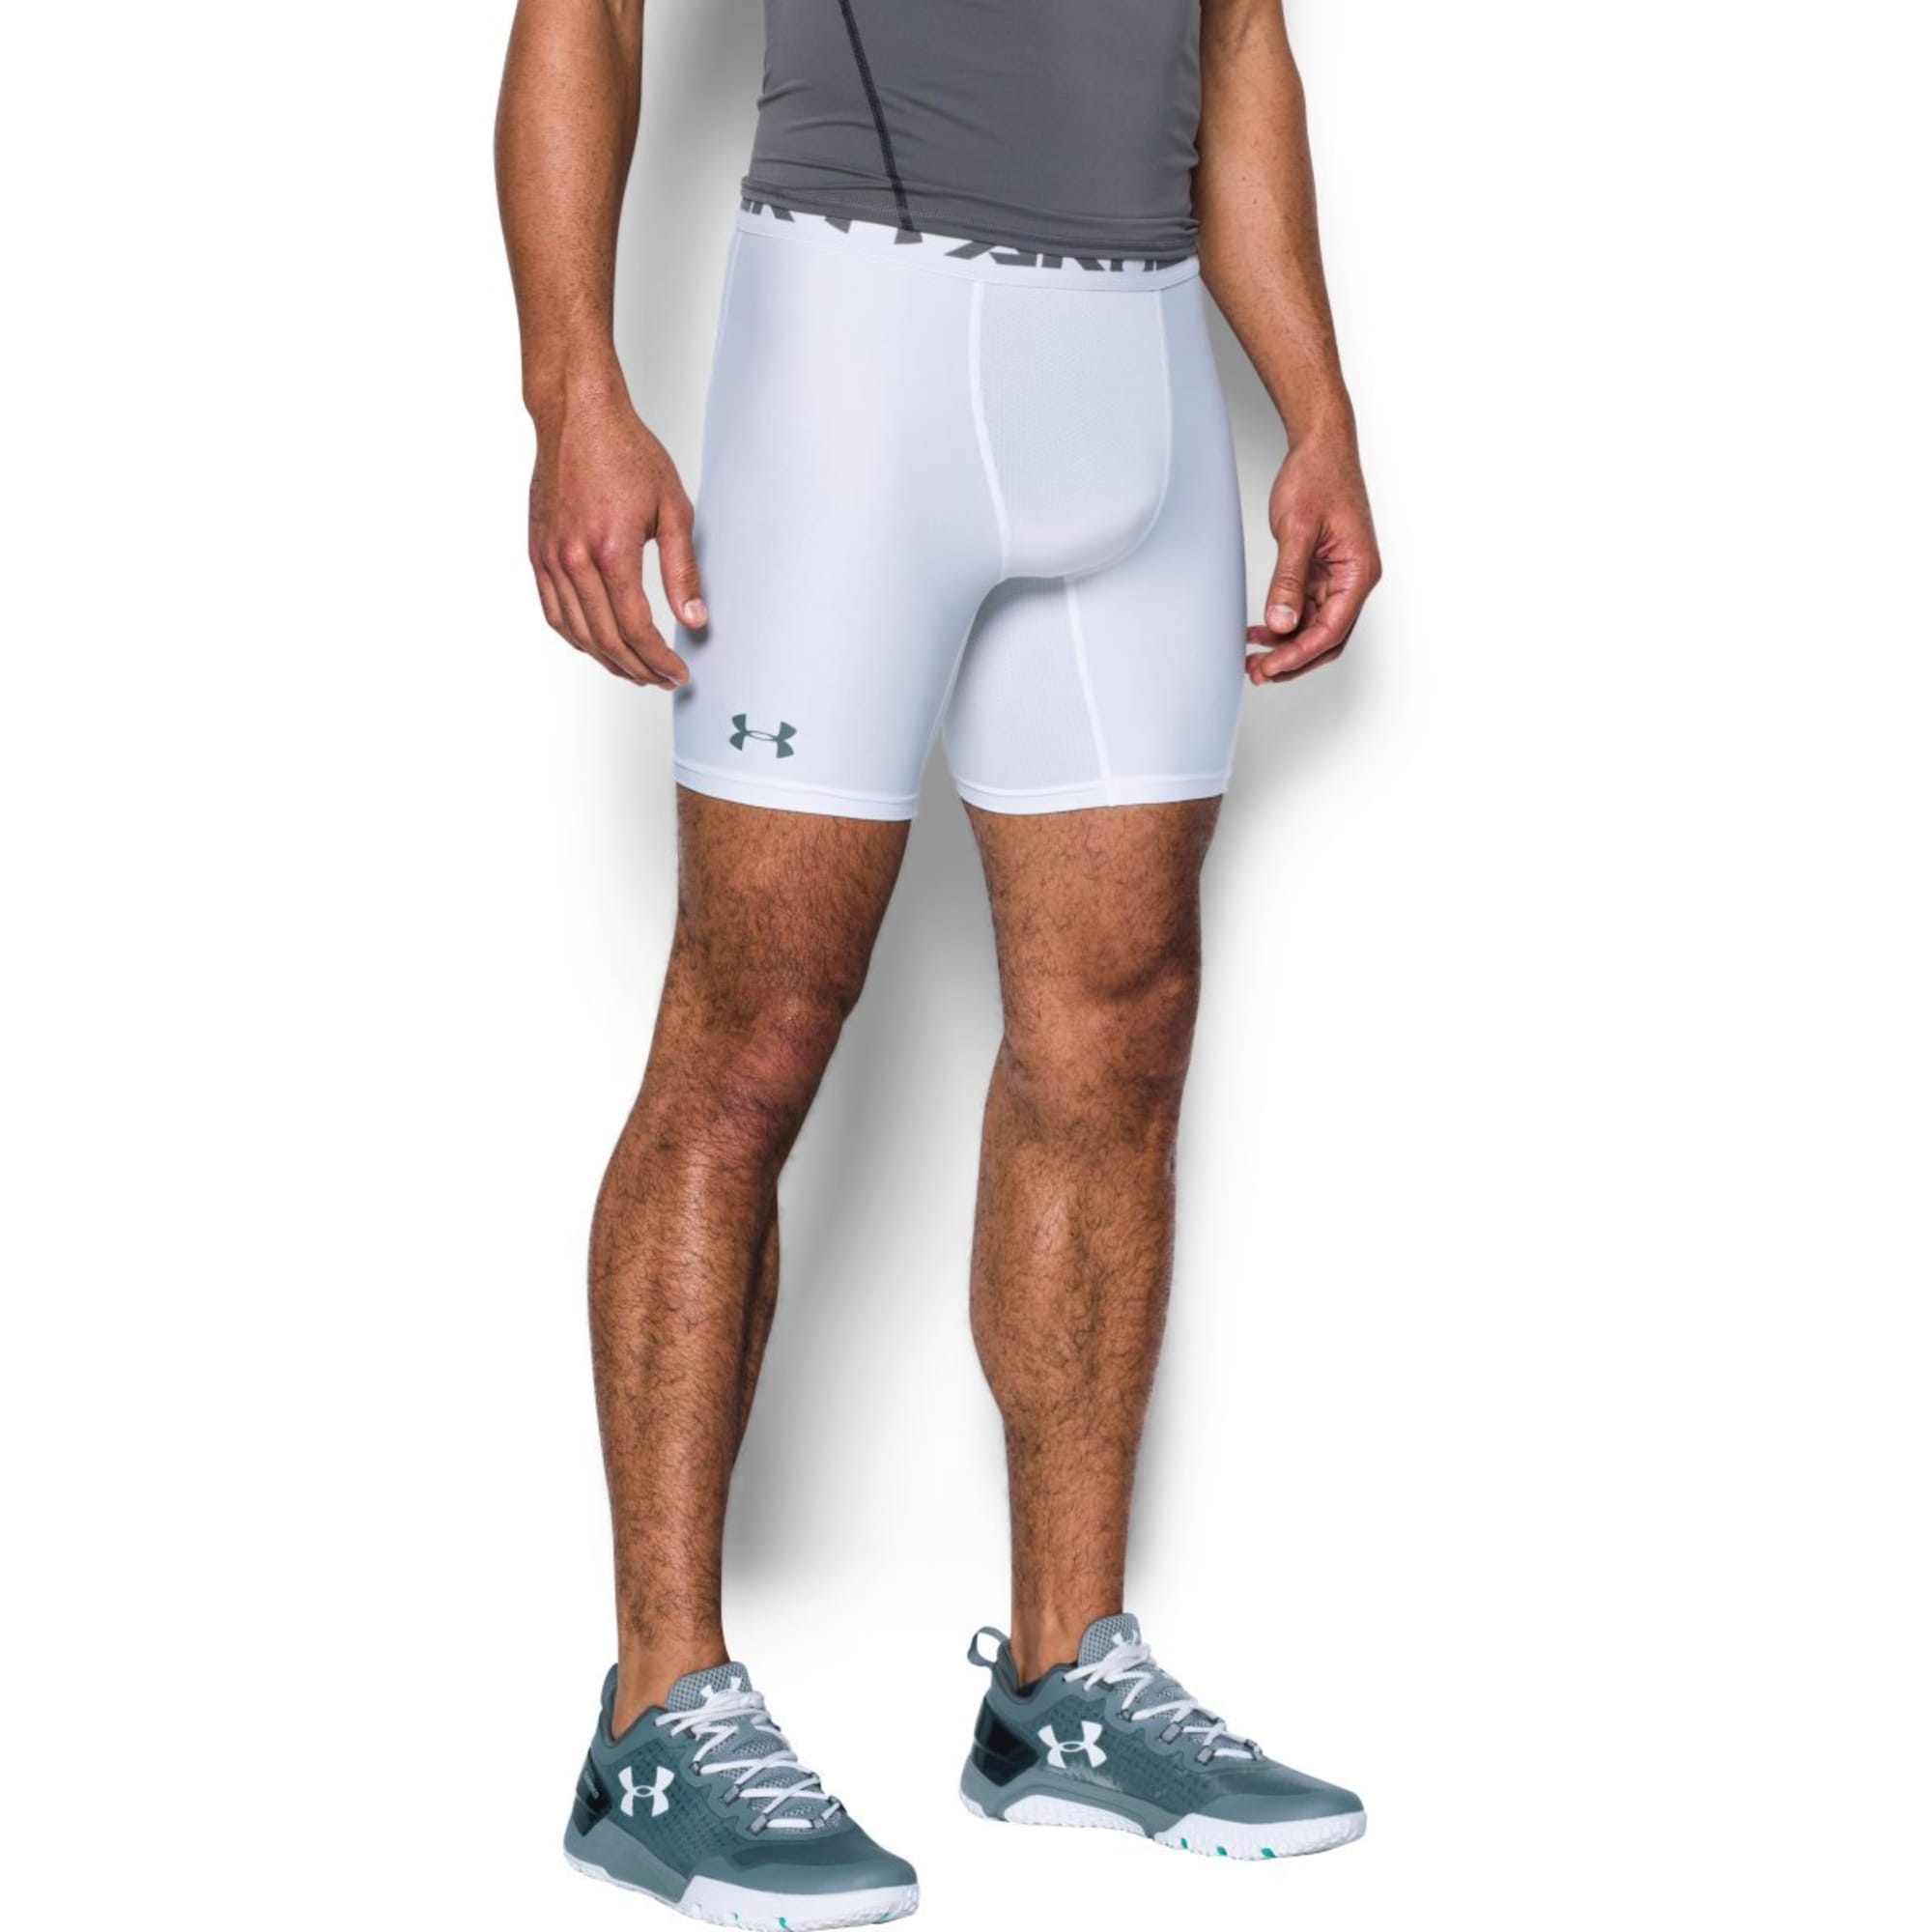 Under Armour Men's and Big Men's HeatGear Armour Compression Shorts, Sizes  up to 2XL